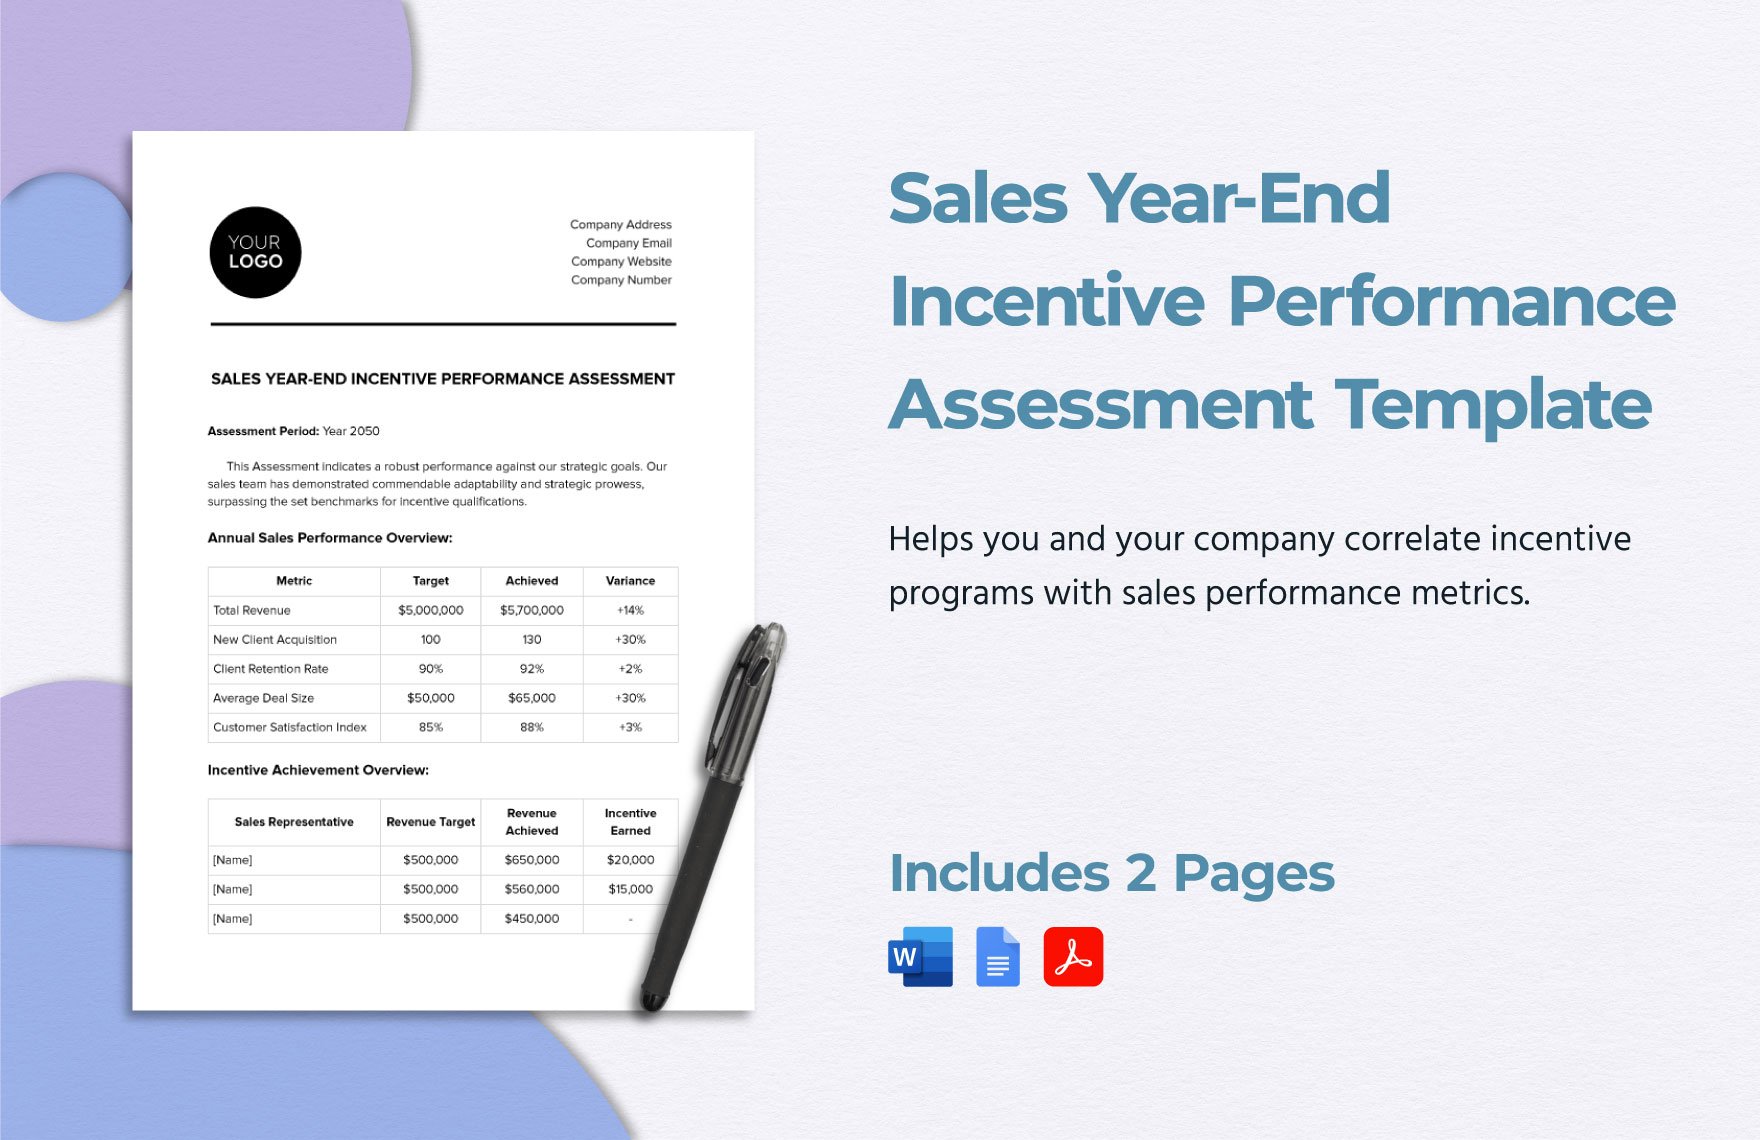 Sales Year-End Incentive Performance Assessment Template